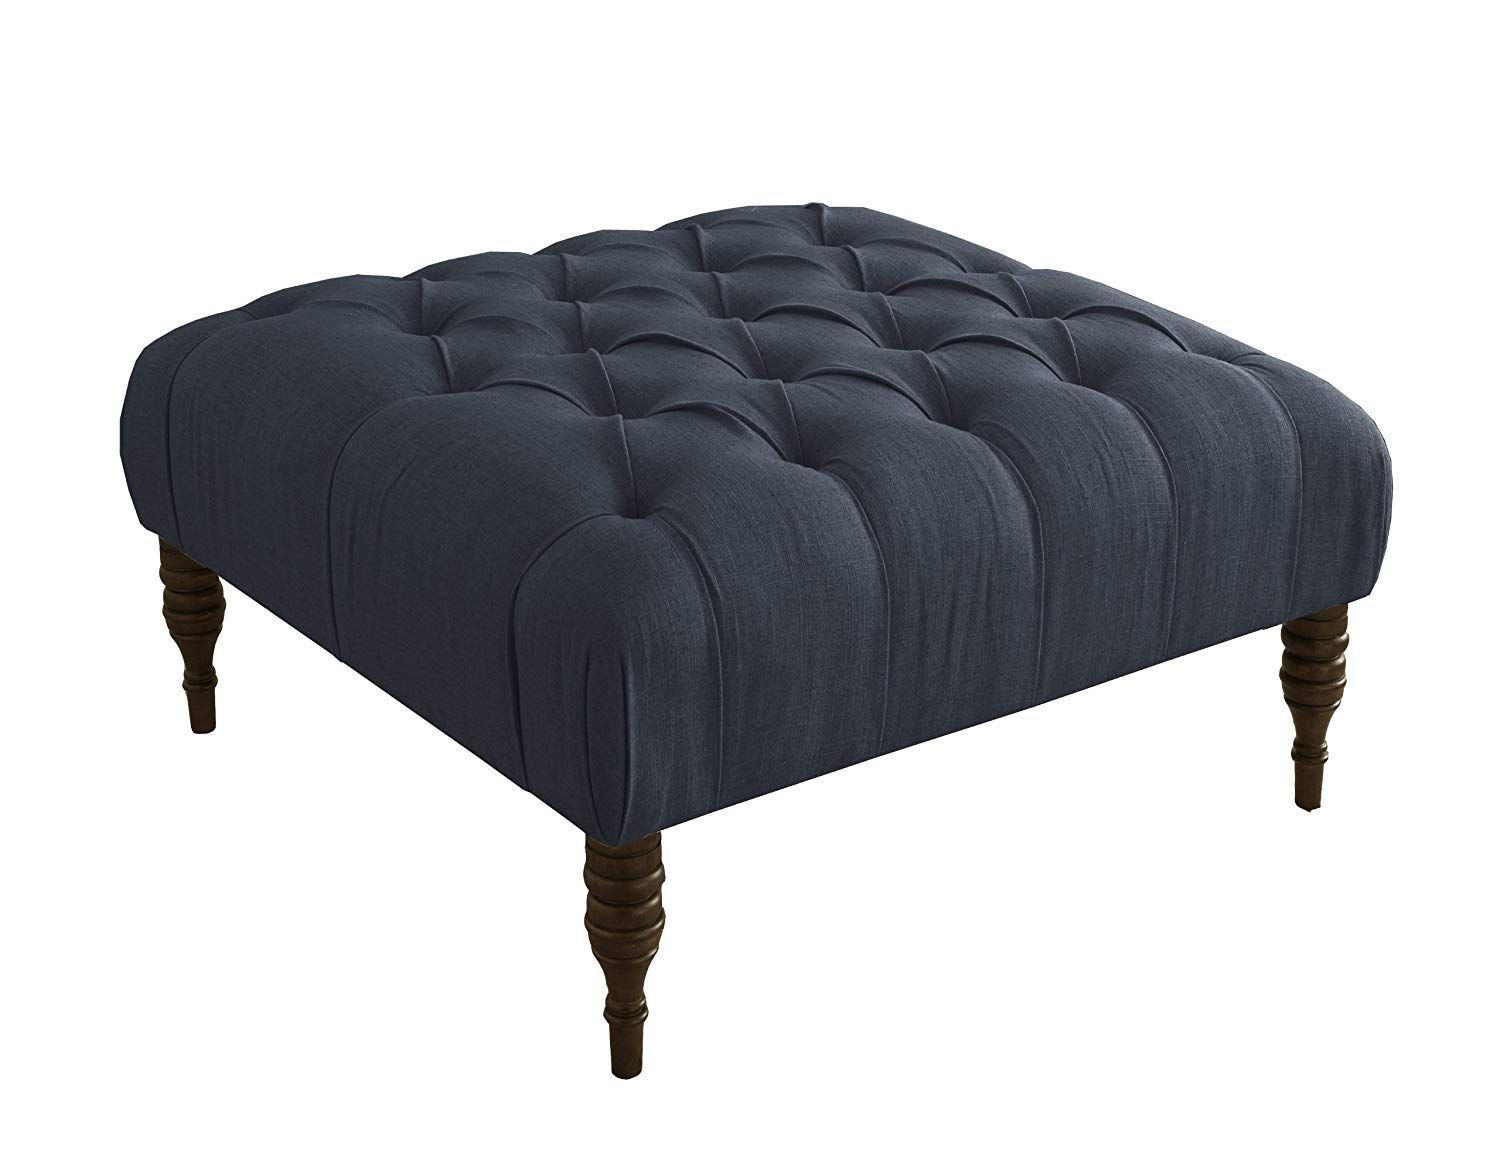 Skyline Furniture Tufted Cocktail Ottoman In Linen Navy | Upholstered With French Linen Black Square Ottomans (View 2 of 20)